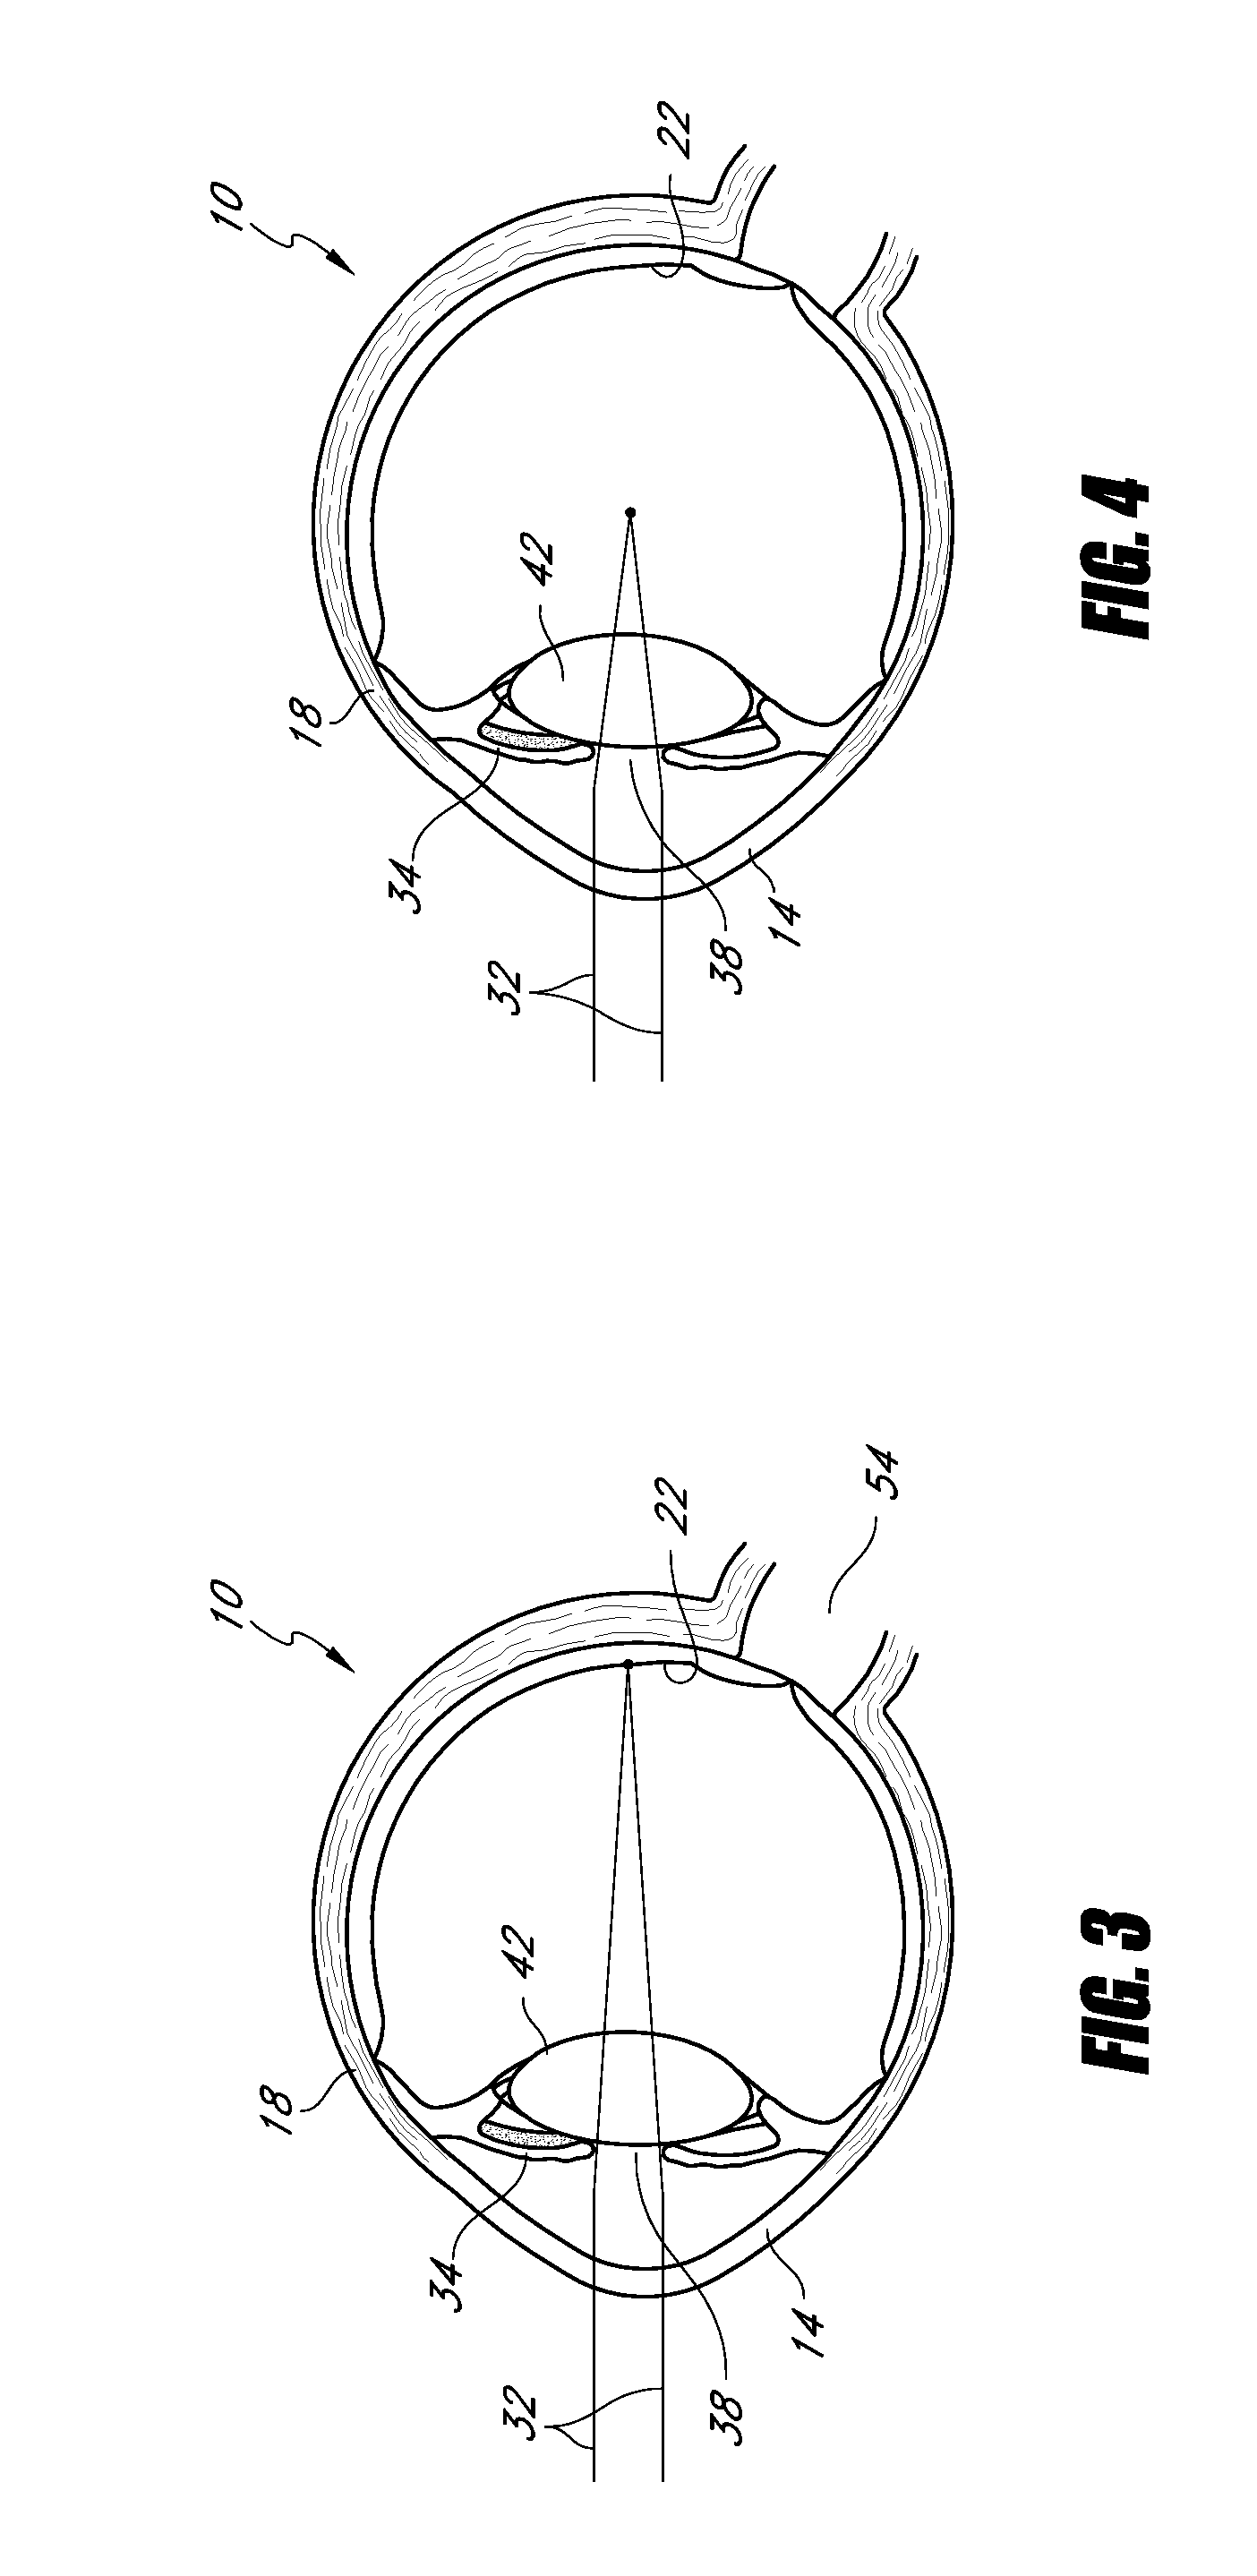 Corneal implant for refractive correction